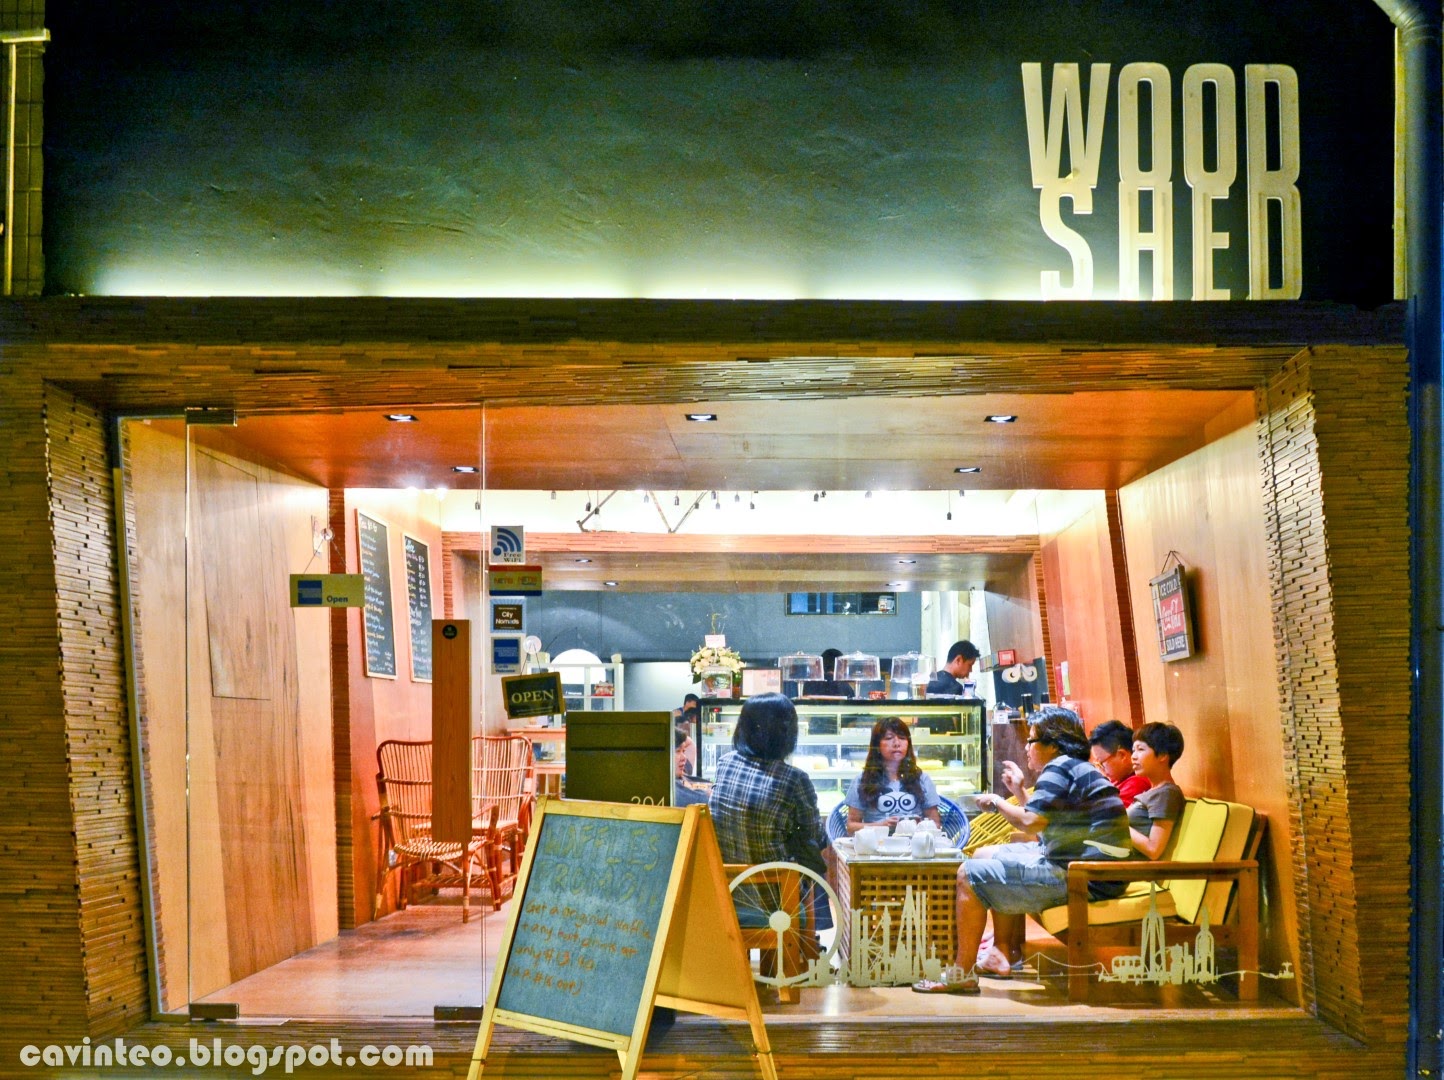 ... Kibbles: Woodshed - The Homely Cafe @ 204 Rangoon Road [Singapore